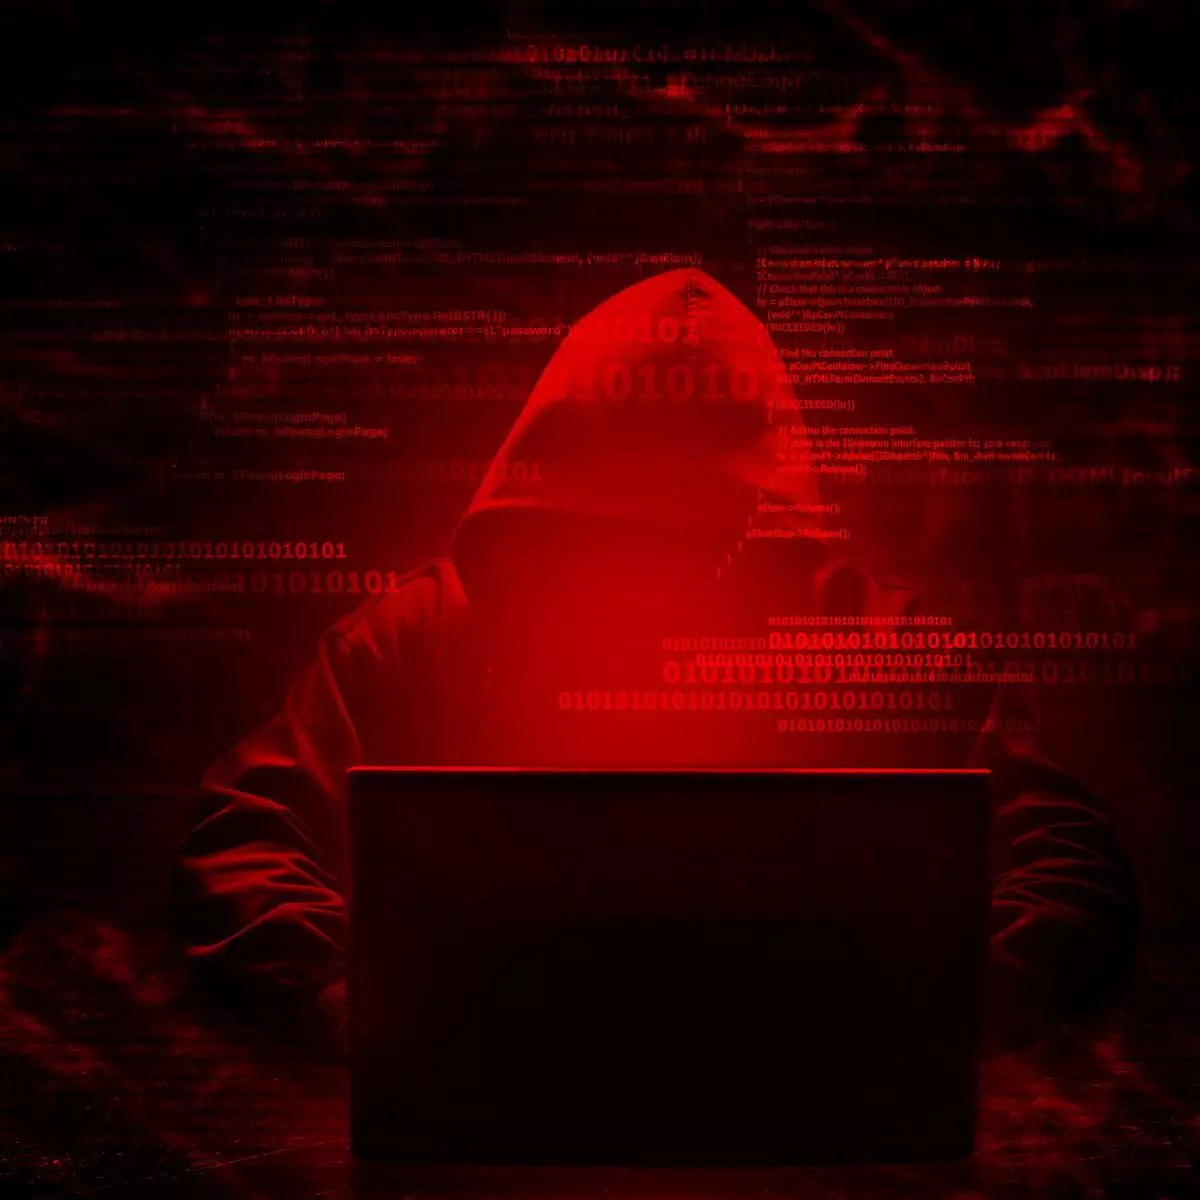 Report: Education sector worst hit globally as ransomware attacks rise in India